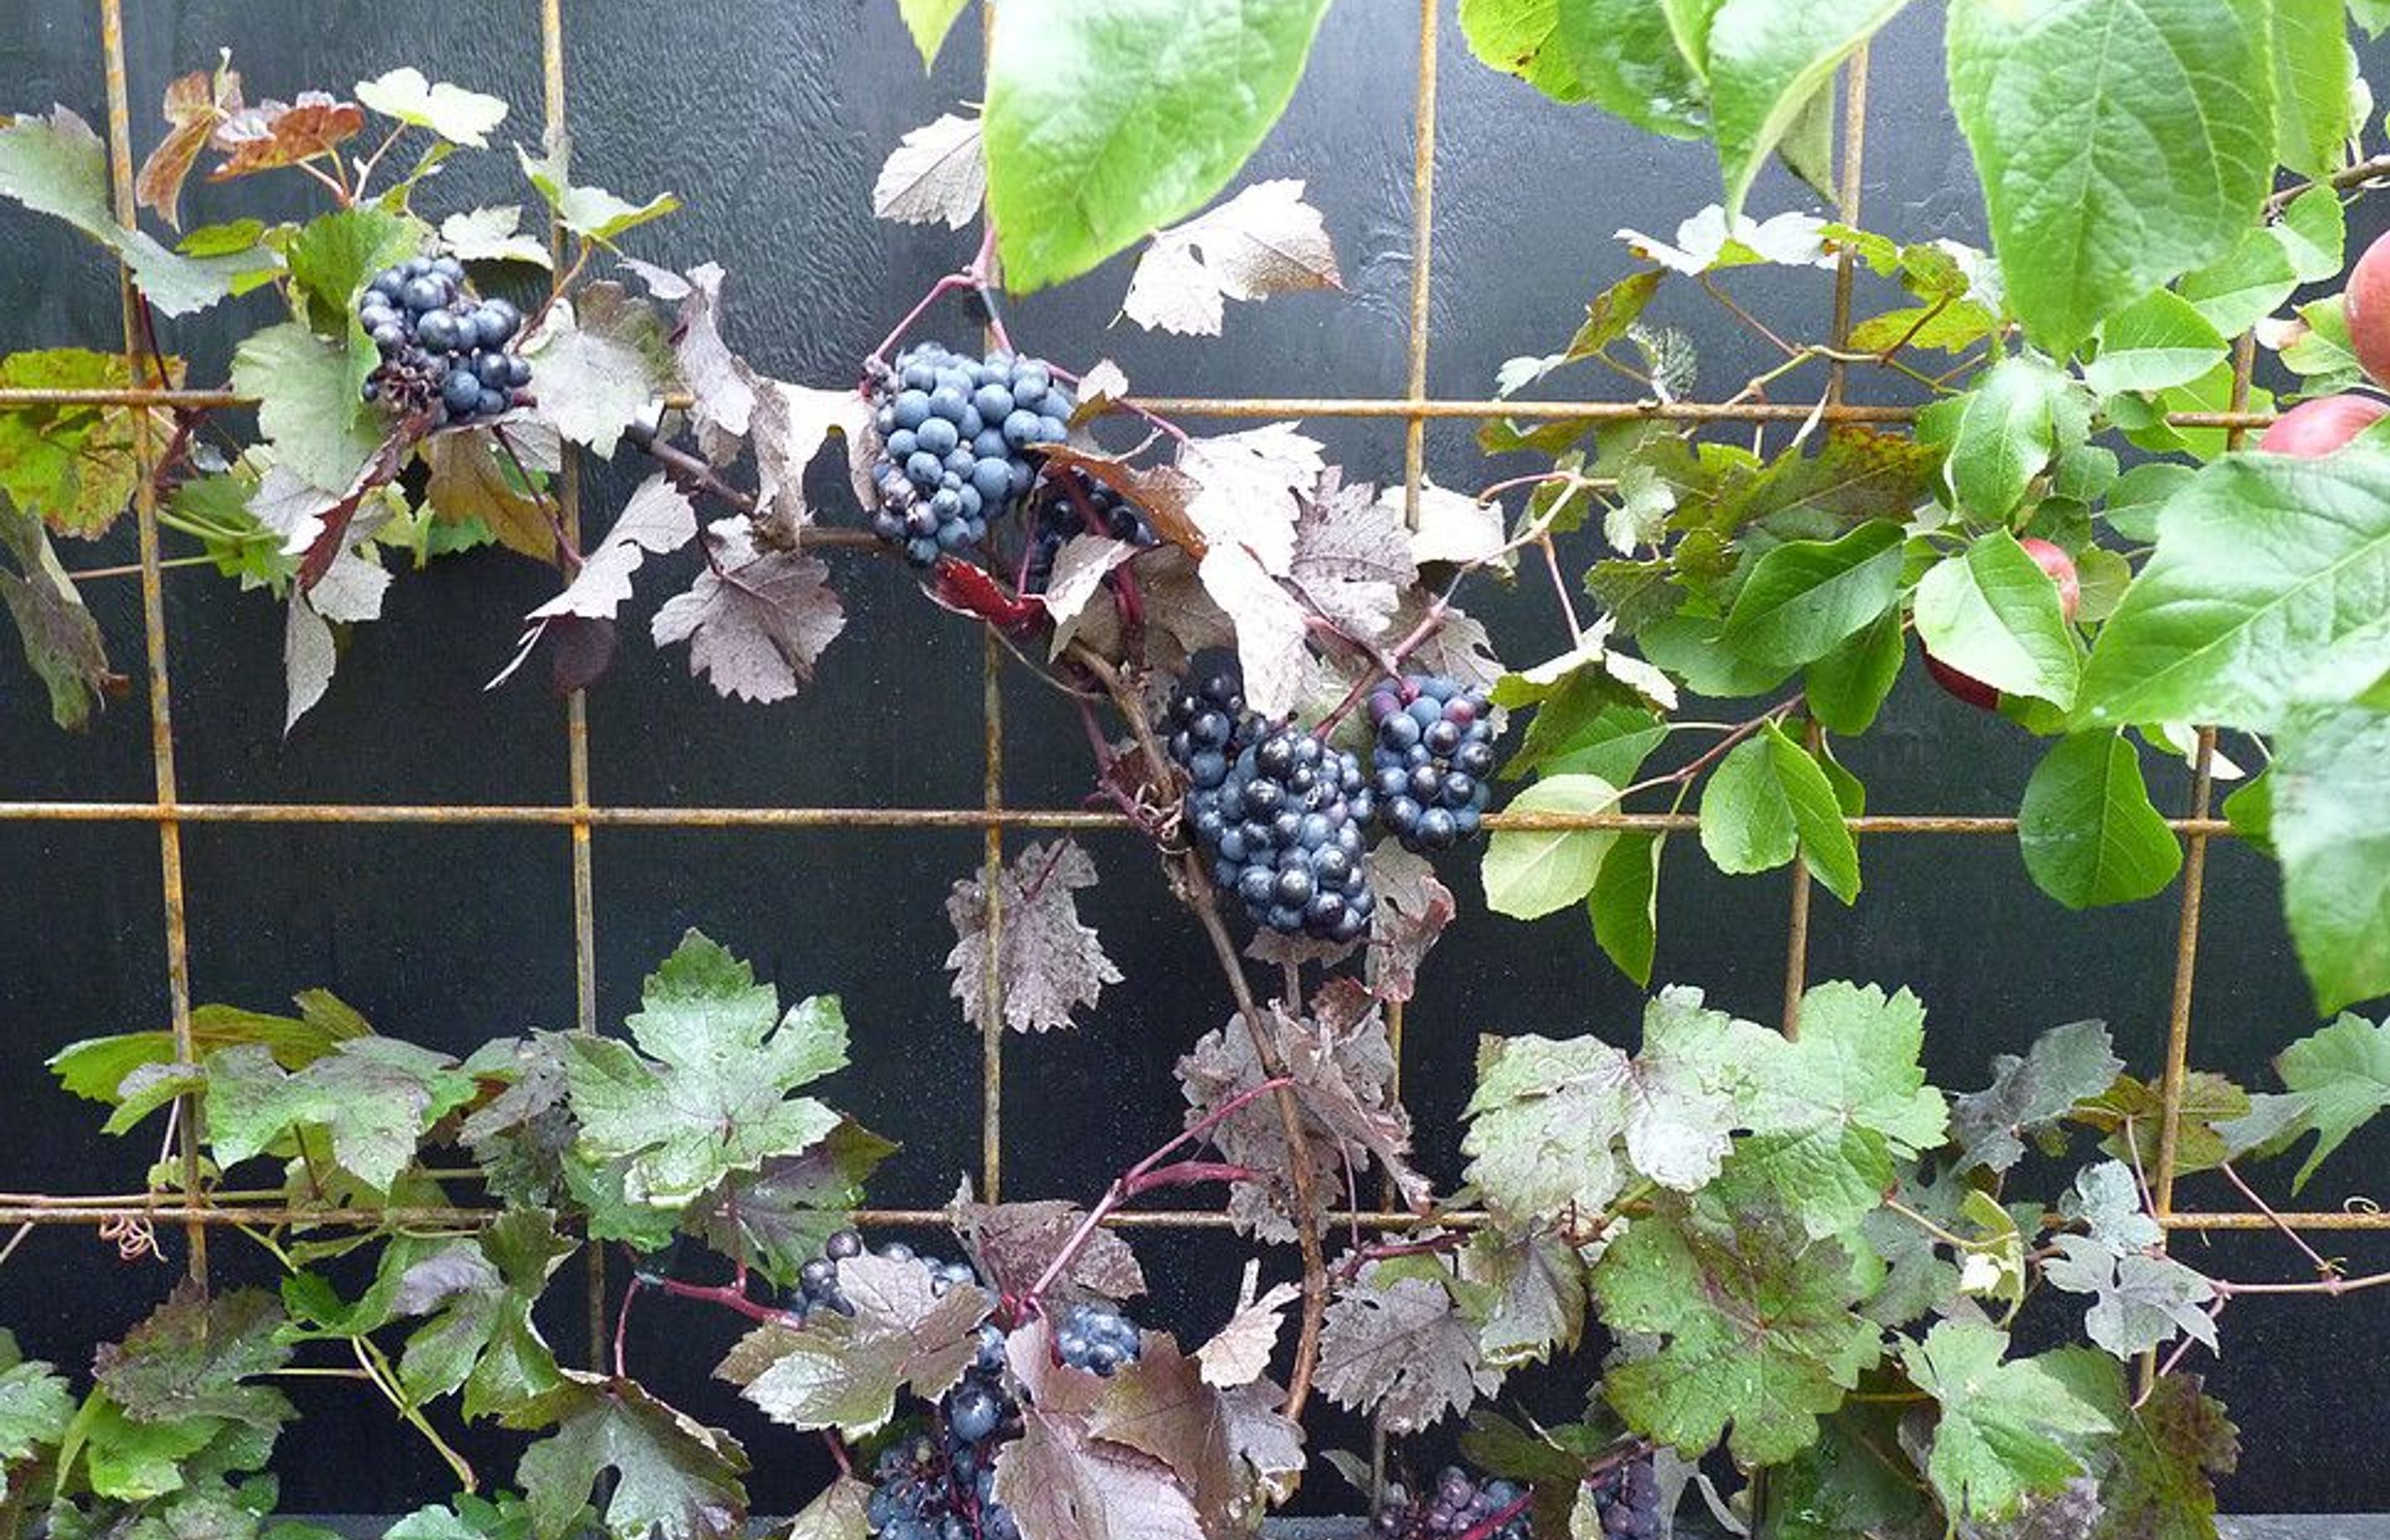 Grapes on the steel reinforcing mesh